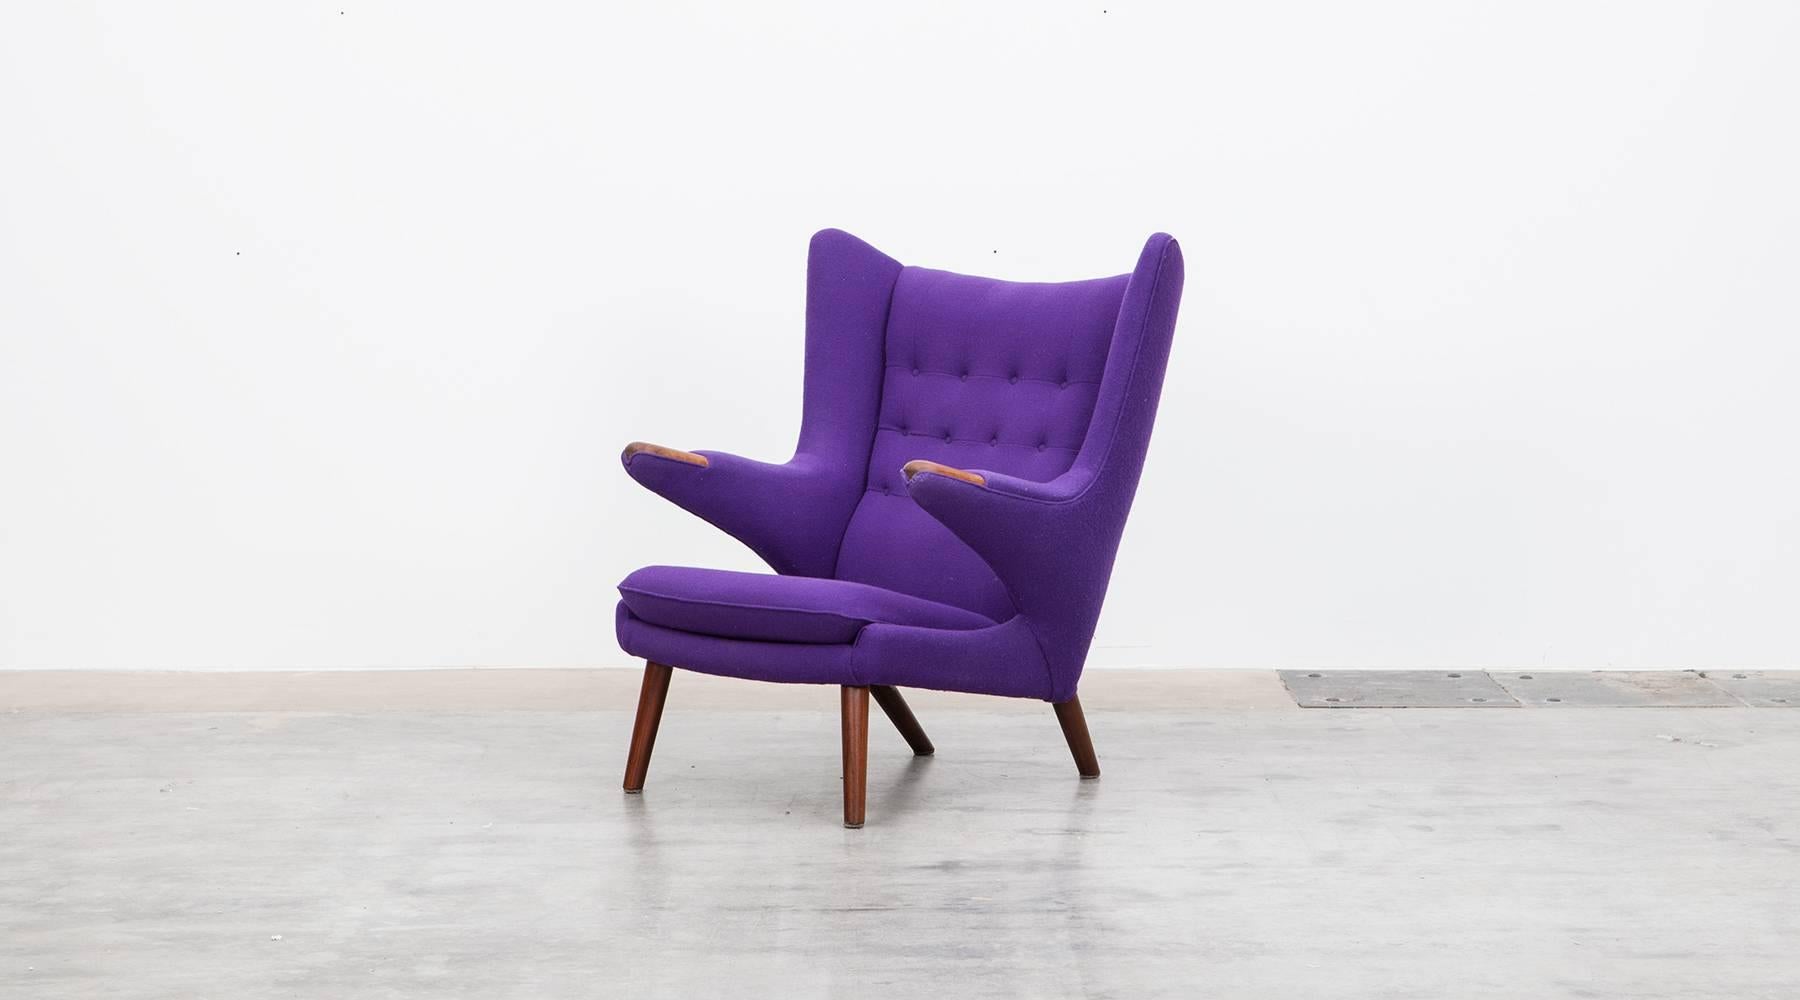 Wonderful original Papa Bear Chair designed by Hans Wegner. It is in perfect condition although the wood is reworked. It comes in shining purple wool fabric. The legs and nails are teak. Manufactured by A.P. Stolen.